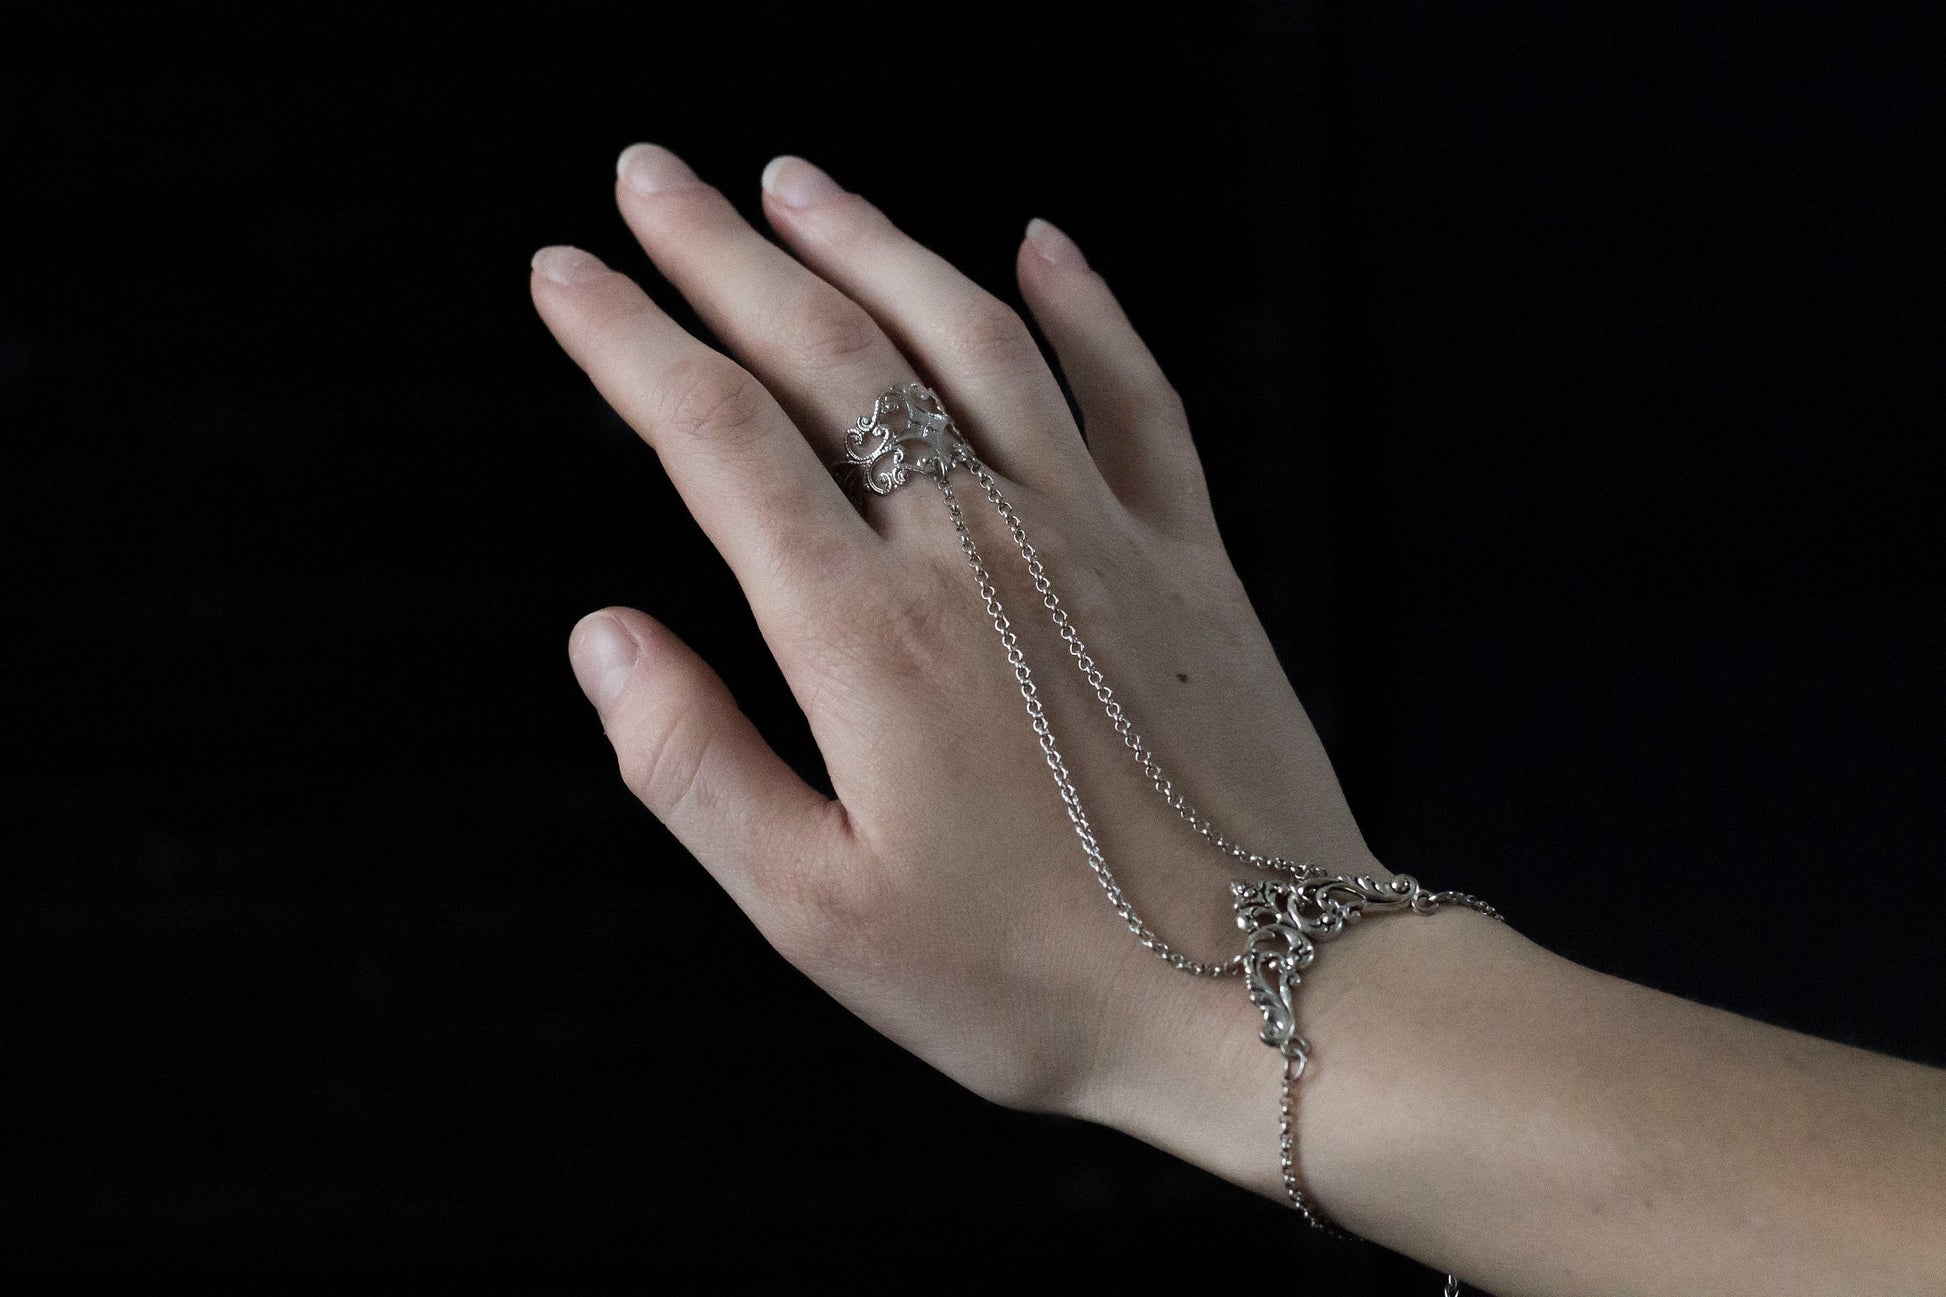 A hand elegantly displays Myril Jewels' punk hand chain bracelet ring, characterized by its intricate filigree details that exude a dark avant-garde charm. The delicate chain links form a graceful drape from the ring to the wrist bracelet, both adorned with gothic florals inspired by Neo Gothic style. This piece is a harmonious blend of gothic-chic and punk aesthetics, ideal for those who favor Halloween Jewelry, Witchcore, or minimal goth fashion. It’s a statement accessory designed for everyday wear